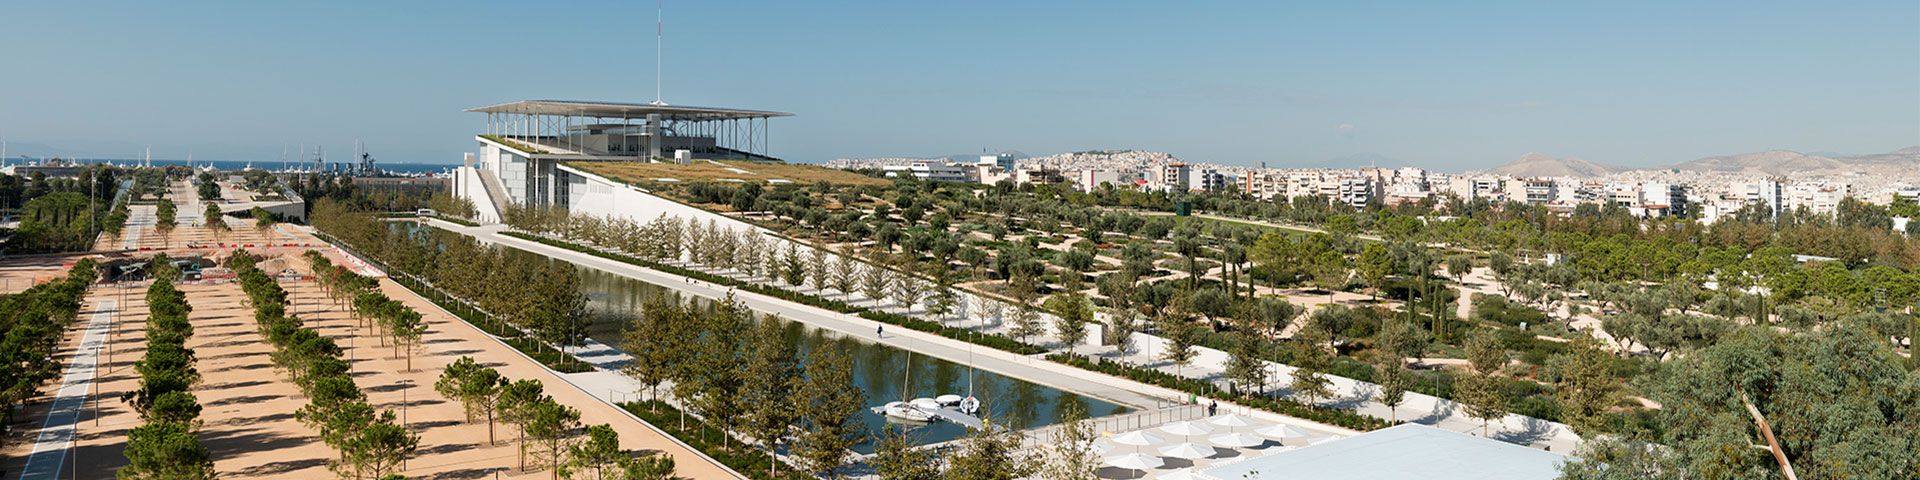 SNFCC is nominated for the RIBA International Prize 2018 - Εικόνα